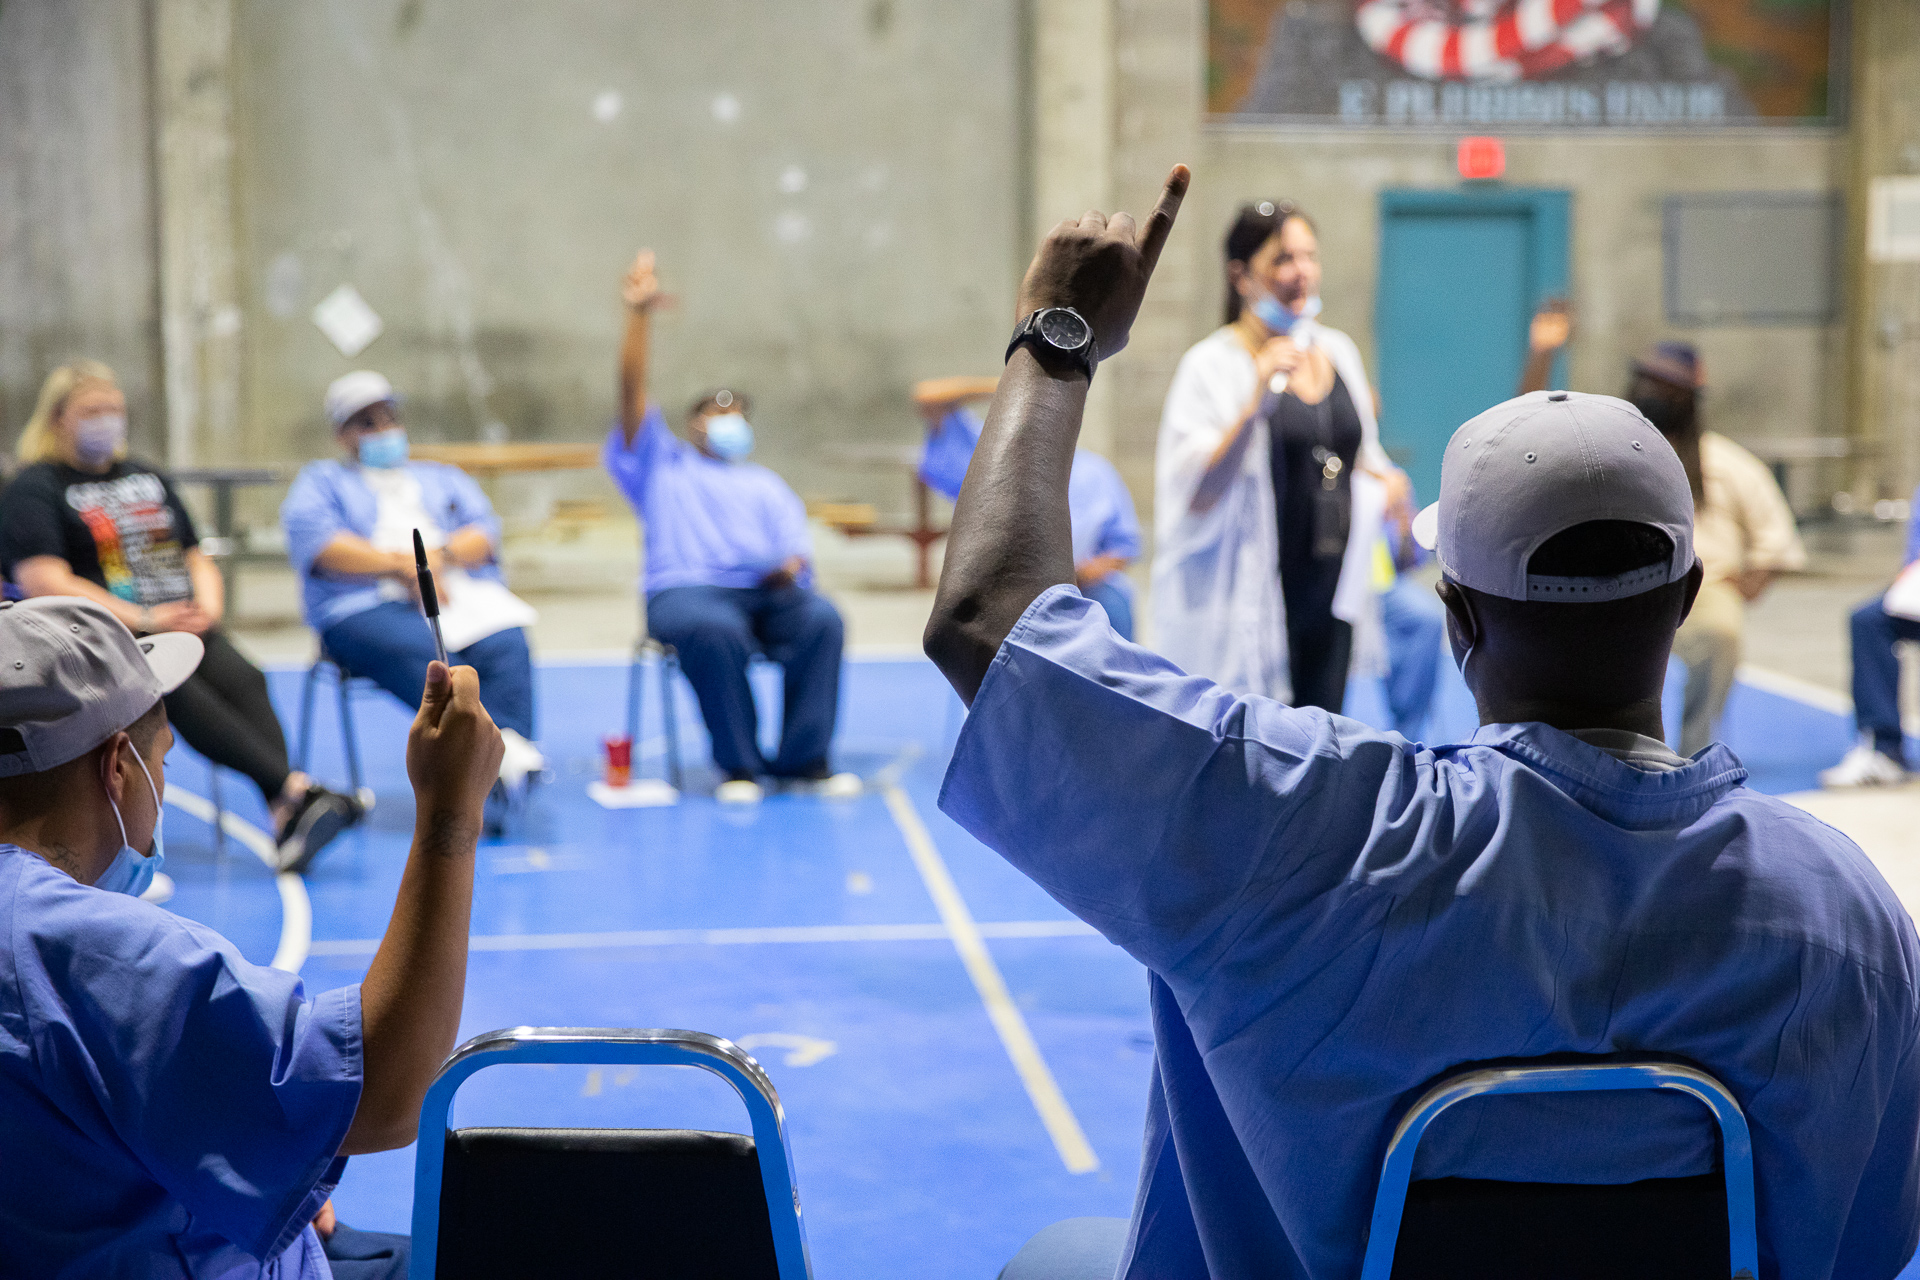 Folsom Prison inmates and participants in the restorative justice program sit in a circle of chairs inside the facility's gym wearing blue prison garb, some with their fingers in the air in response to a speaker from Sac State's group.